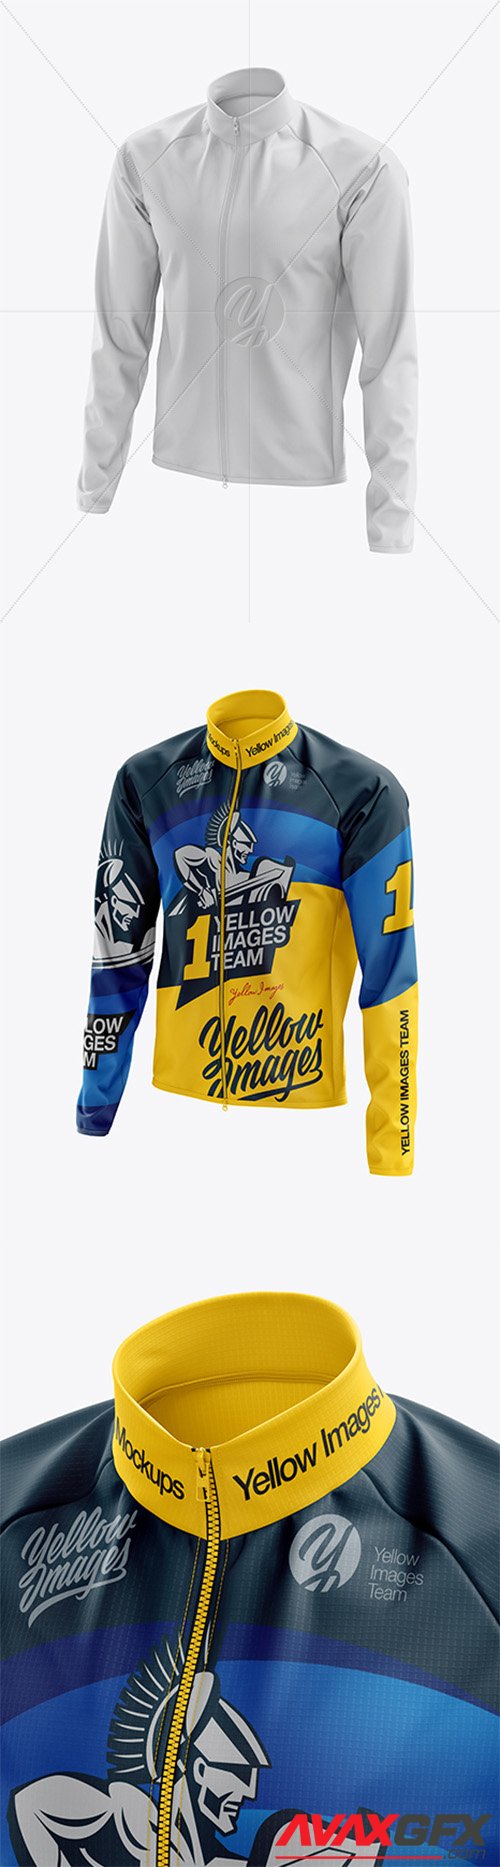 Download Men's Cycling Wind Jacket mockup (Half Side View) 39260 » AVAXGFX - All Downloads that You Need ...